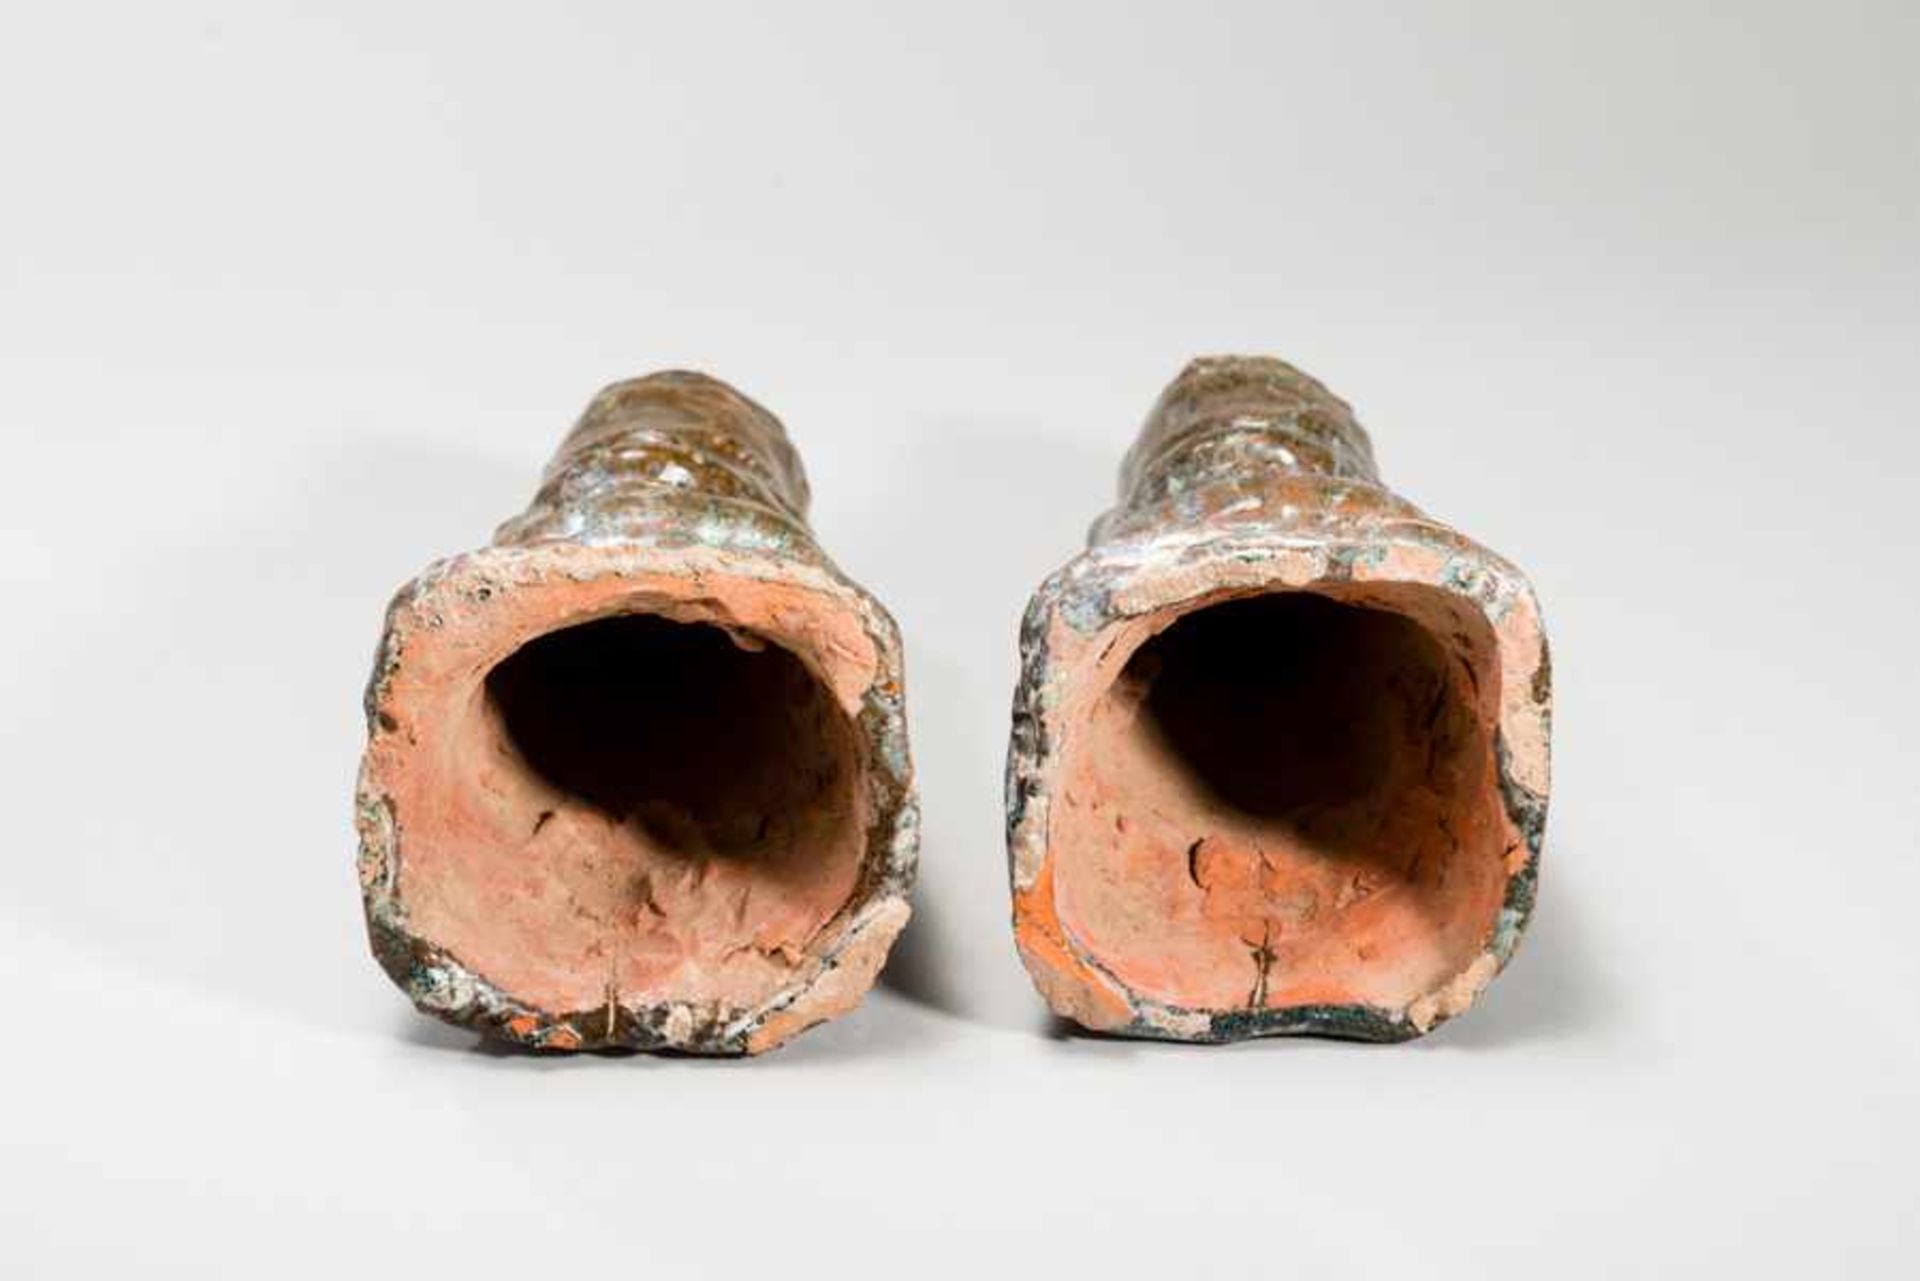 PAIR OF FIGURE-SHAPED OIL LAMPS (DIVINITIES?) Glazed ceramic. China, Eastern Han dynasty(25 - 220 - Image 5 of 5